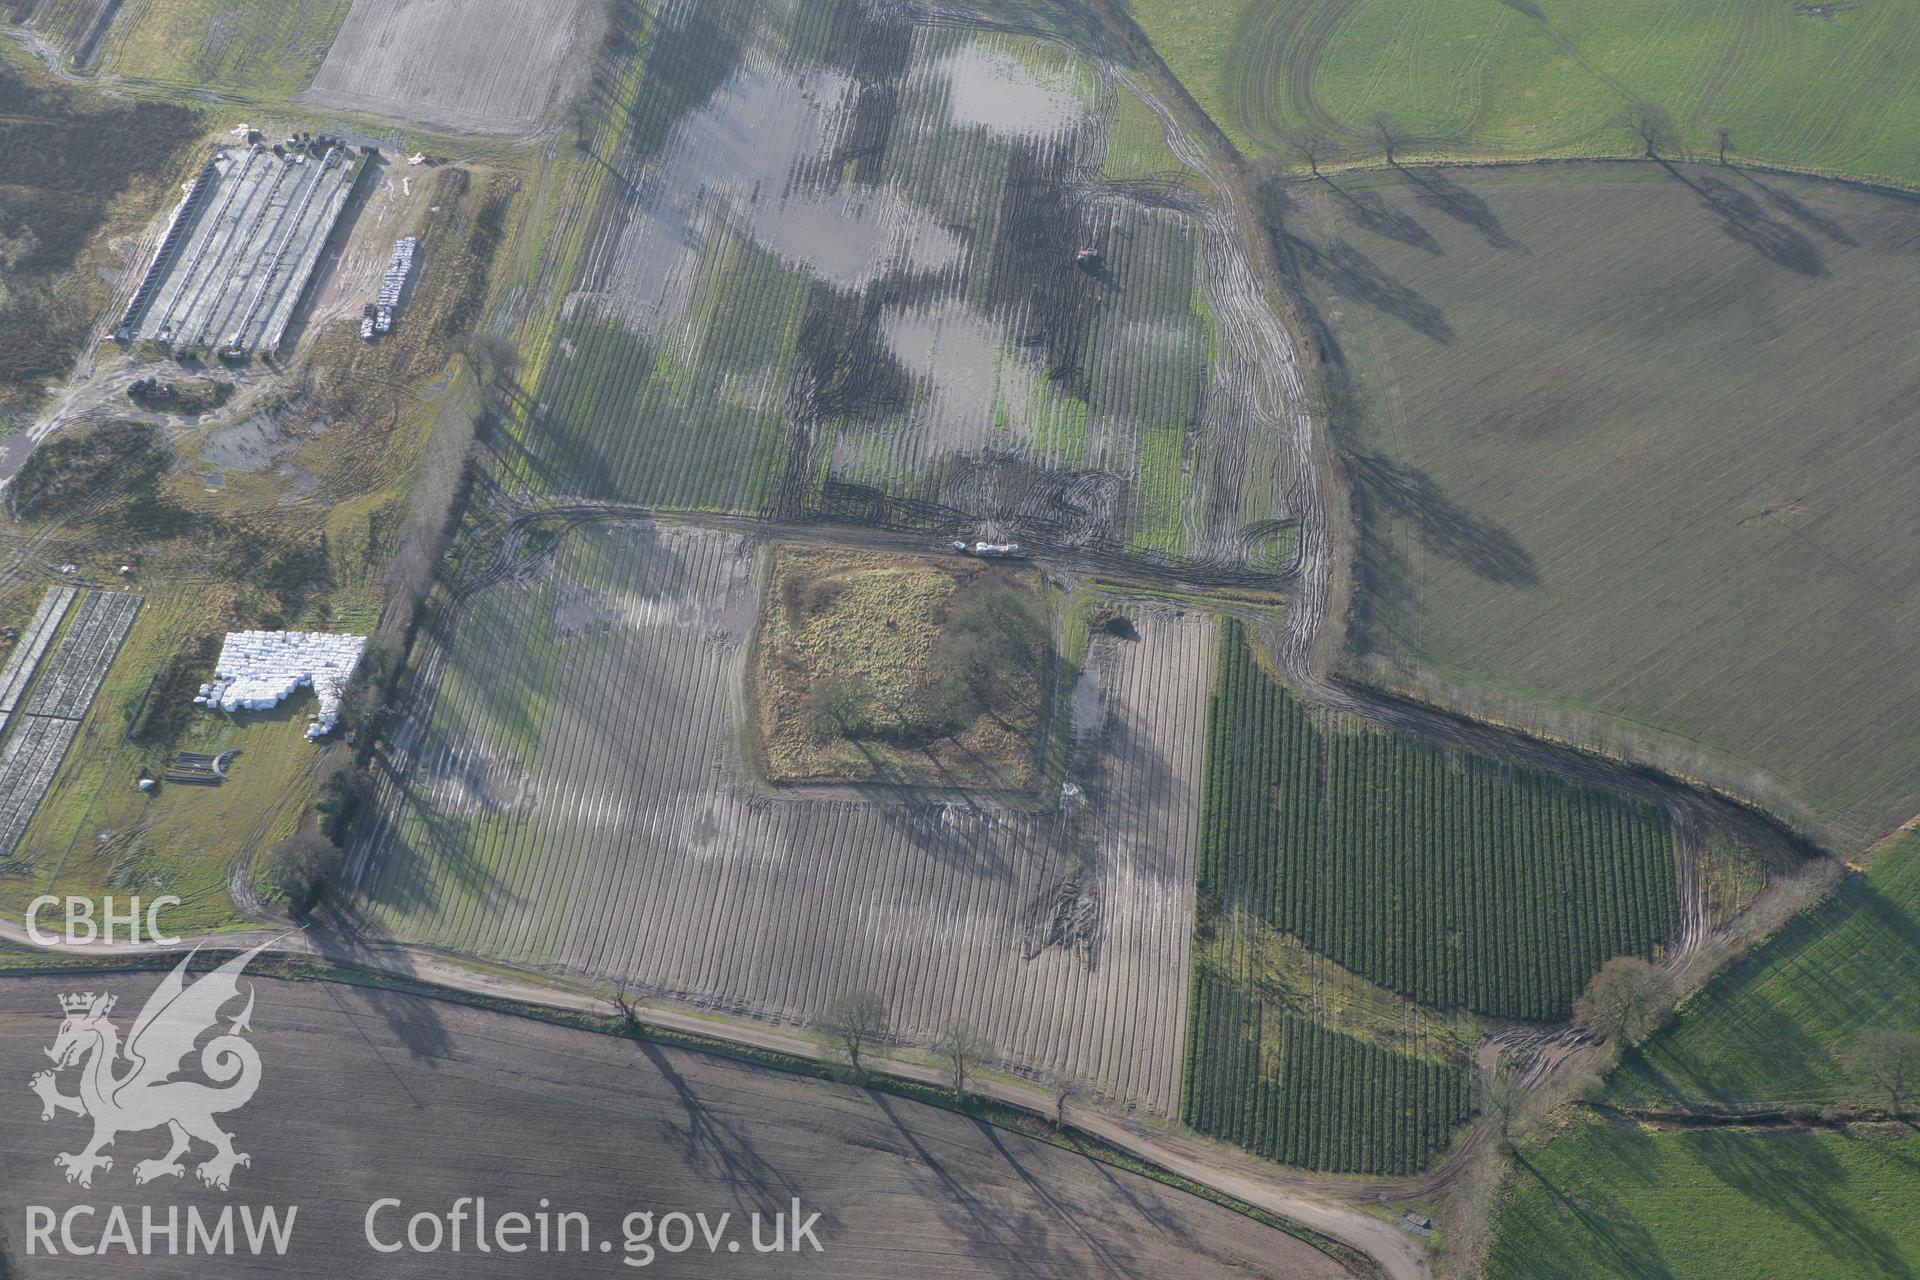 RCAHMW colour oblique photograph of Haulton Ring moated site. Taken by Toby Driver on 21/01/2009.